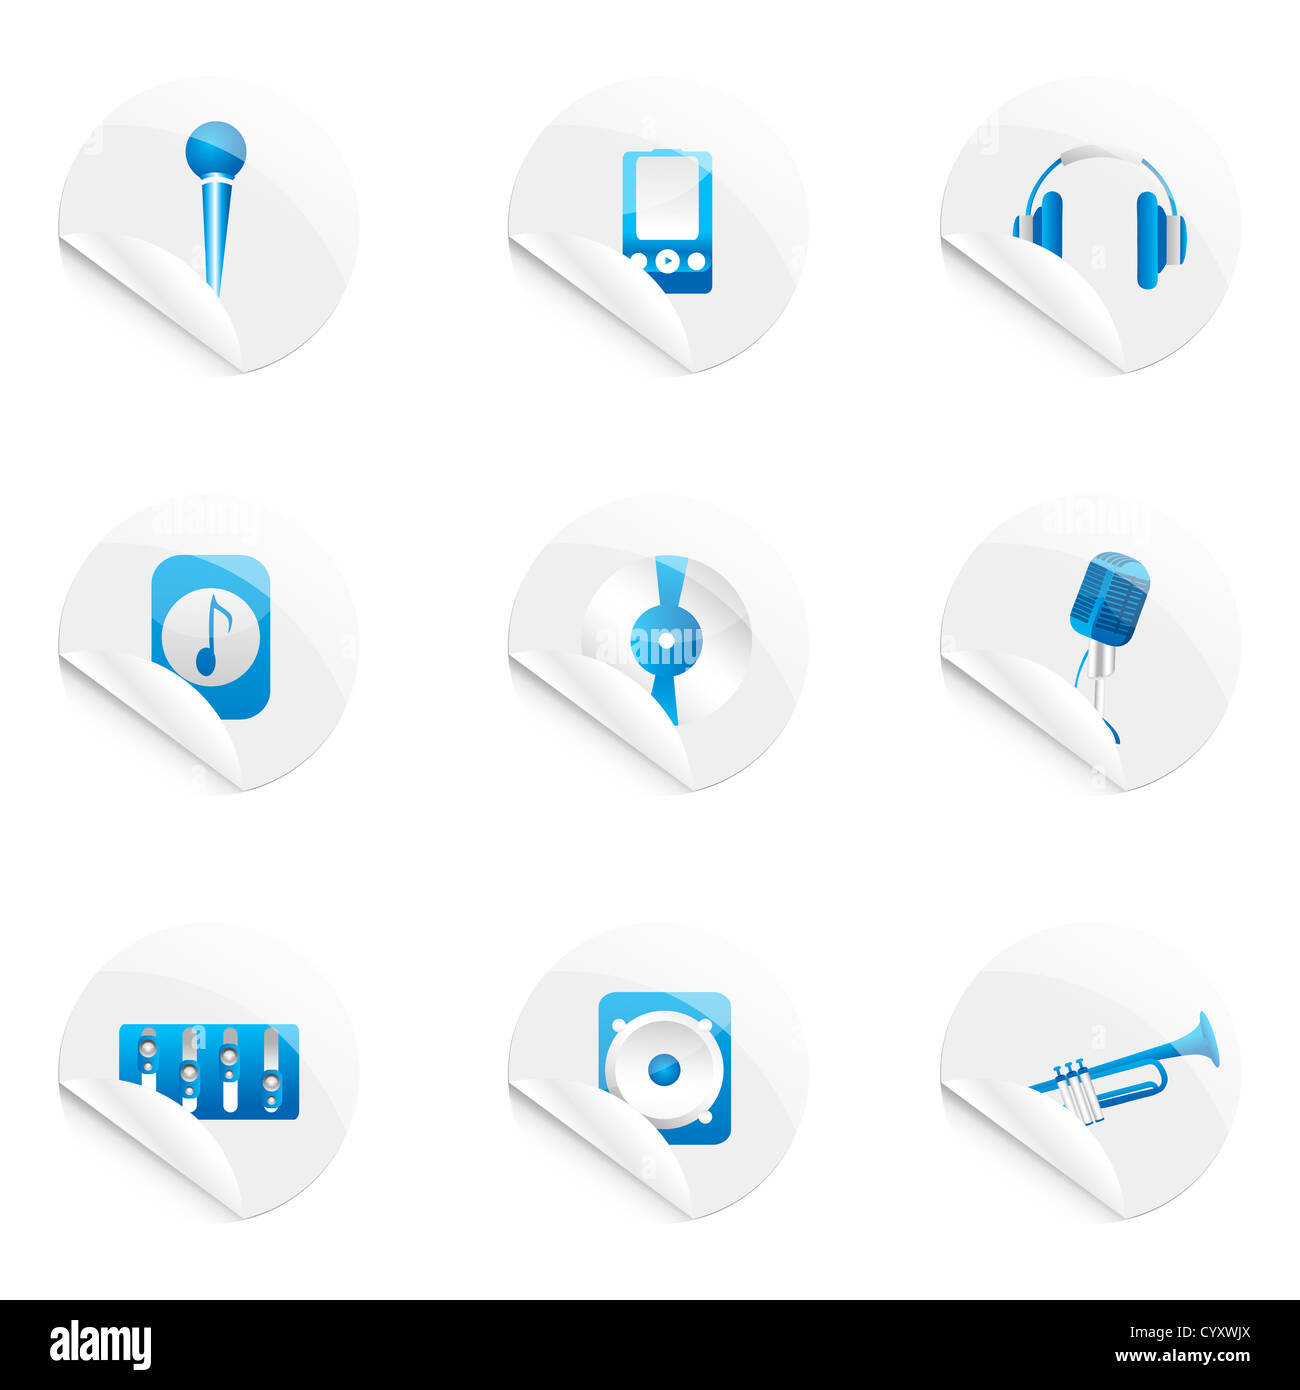 illustration of set of musical components on stickers Stock Photo